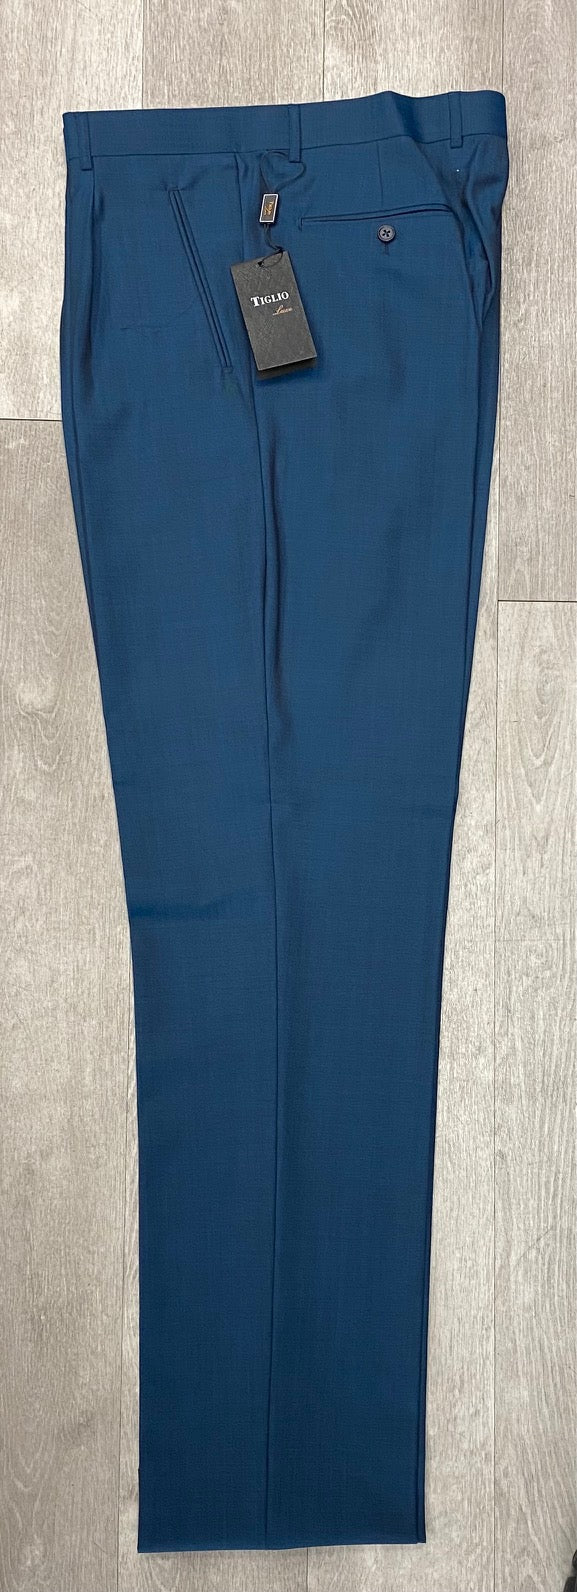 Tiglio Luxe 2521 Comfort Fit Single Pleated Pants 18+ Inch Leg TS5128/A Teal Blue (SIZE 42 & 48 ONLY)